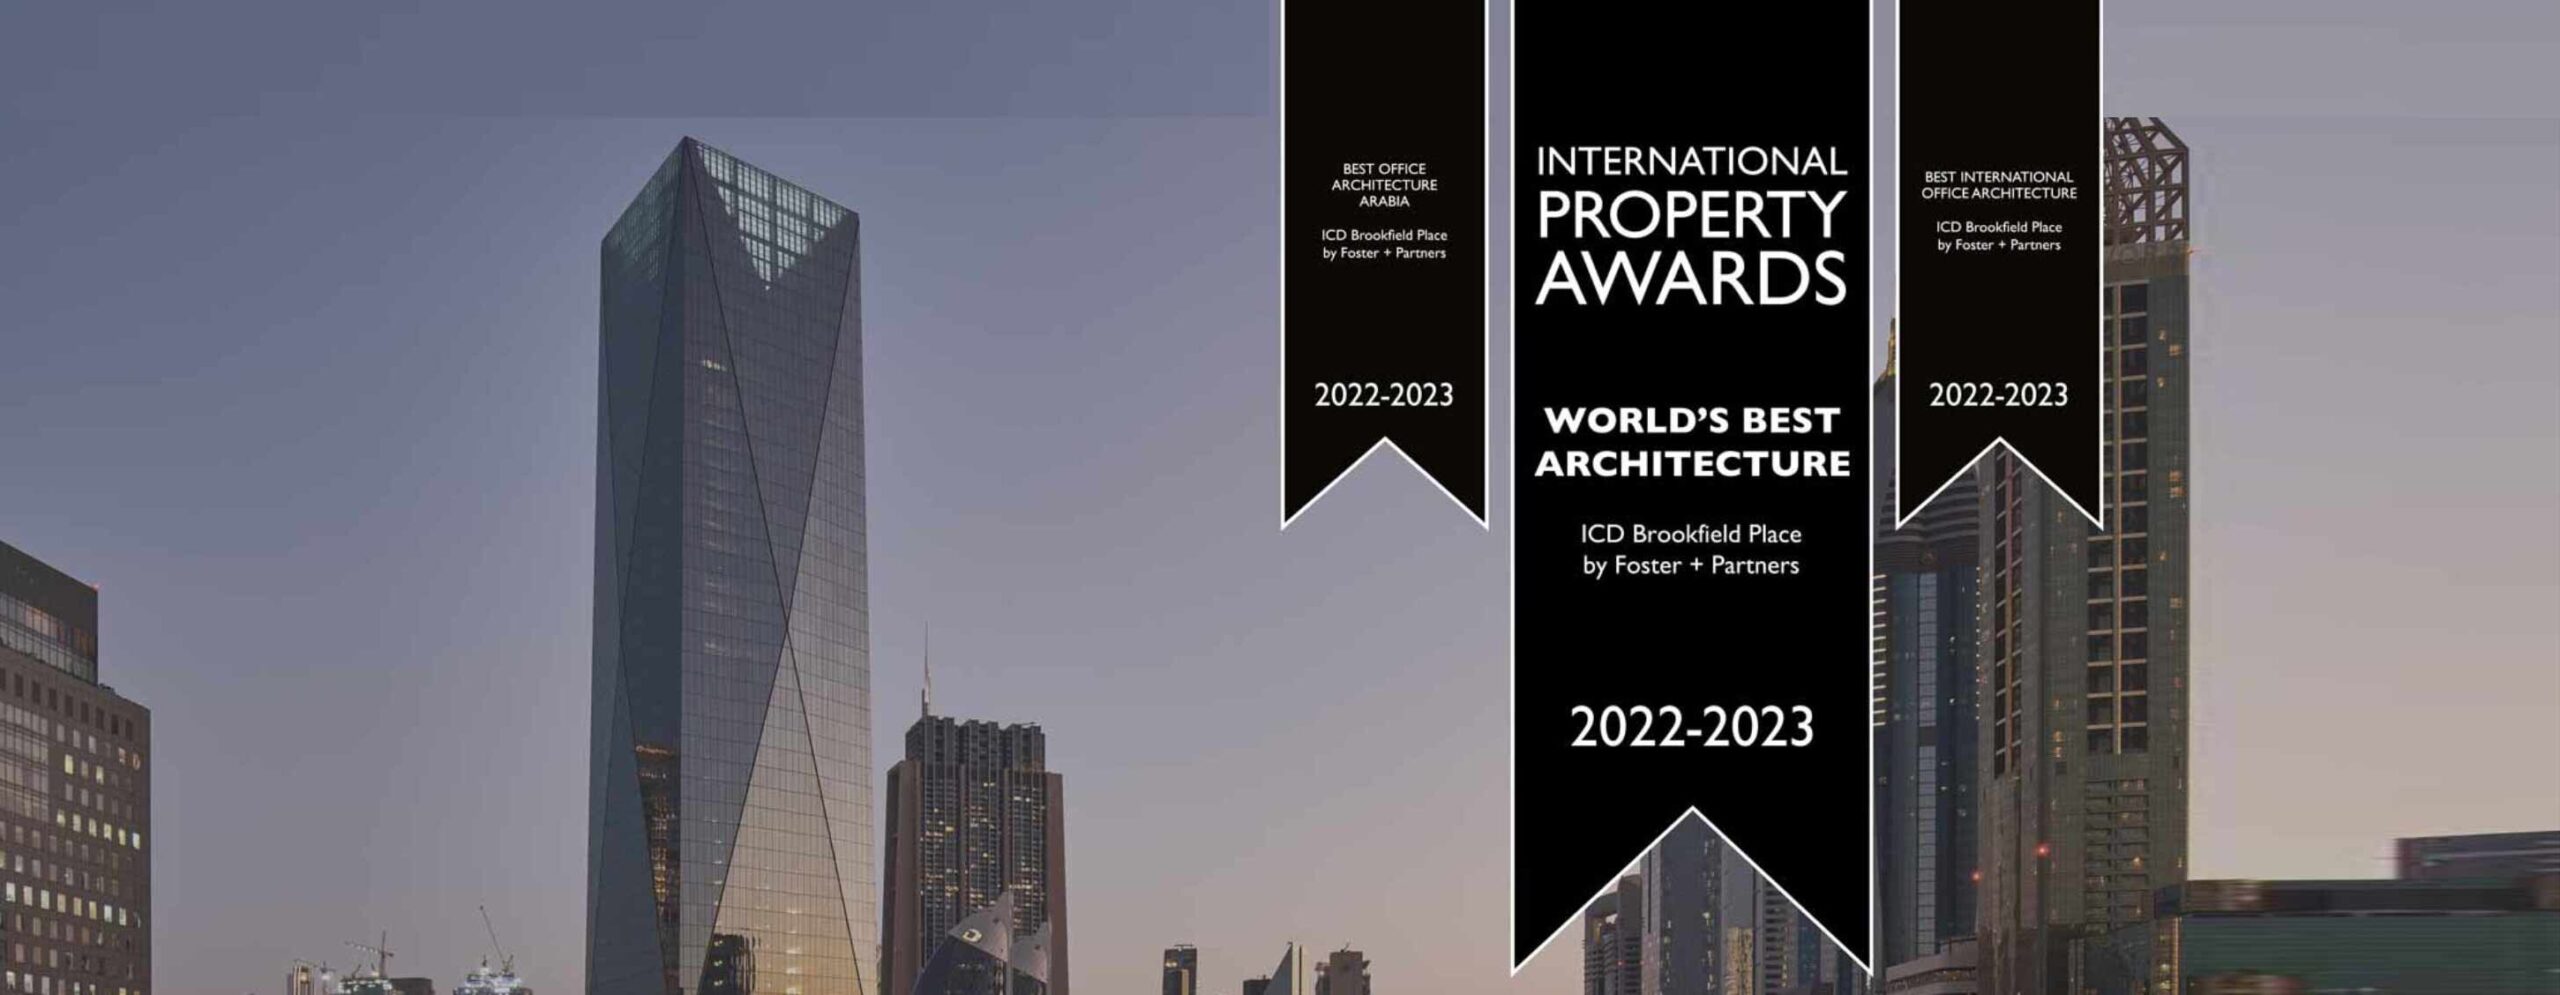 ICD Brookfield Place Dubai Three wins for ICD Brookfield Place at the International Property Awards